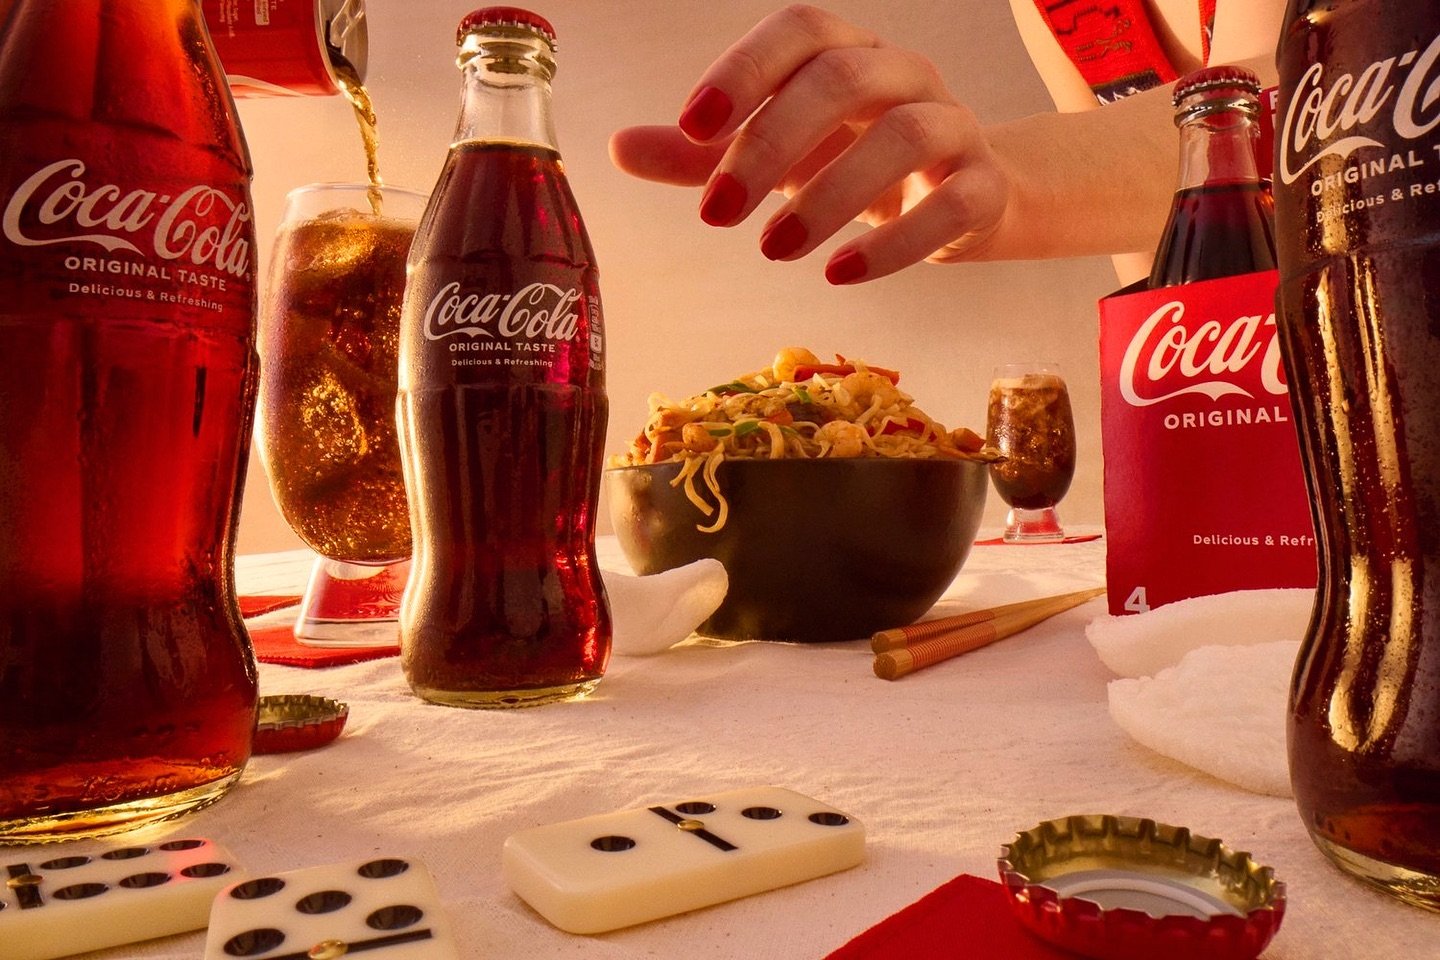 Countdown to the long weekend and scenes like this with @cocacola ❤️🫶 

@atrare.co #longweekend #feasting #womeninphotography #cocacola #foodanddrinkphotographer #drinksphotography  #advetisingphotographer #femalephotographer #chloehardwickphotograp